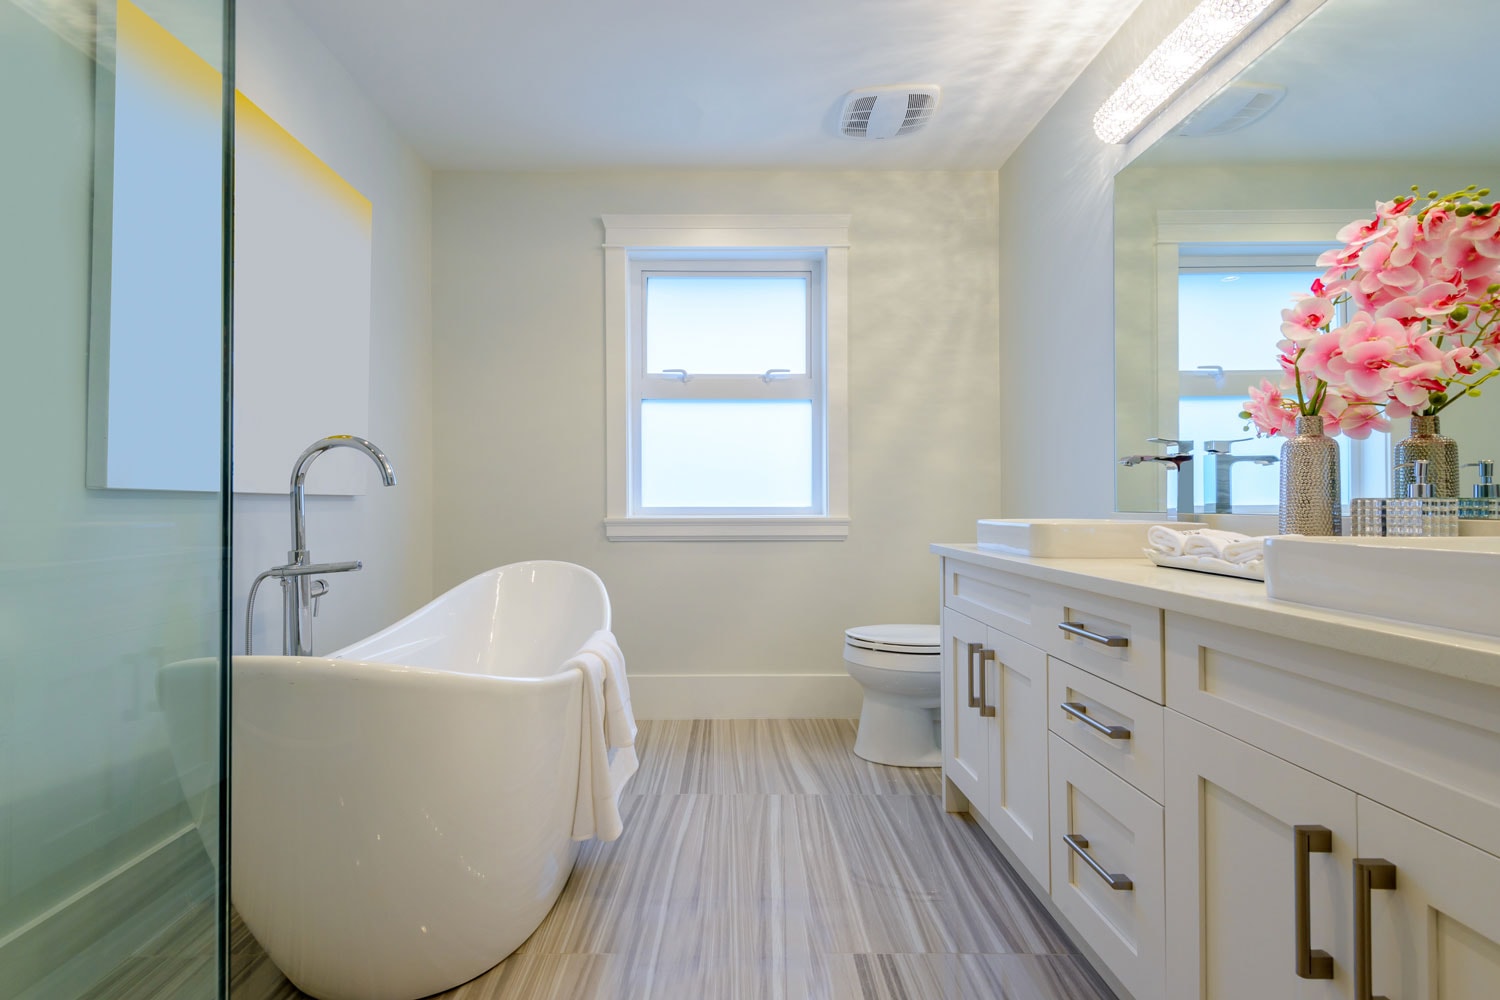 A boat shaped bathtub inside a modern bathroom with laminated flooring, white walls and a white awning window